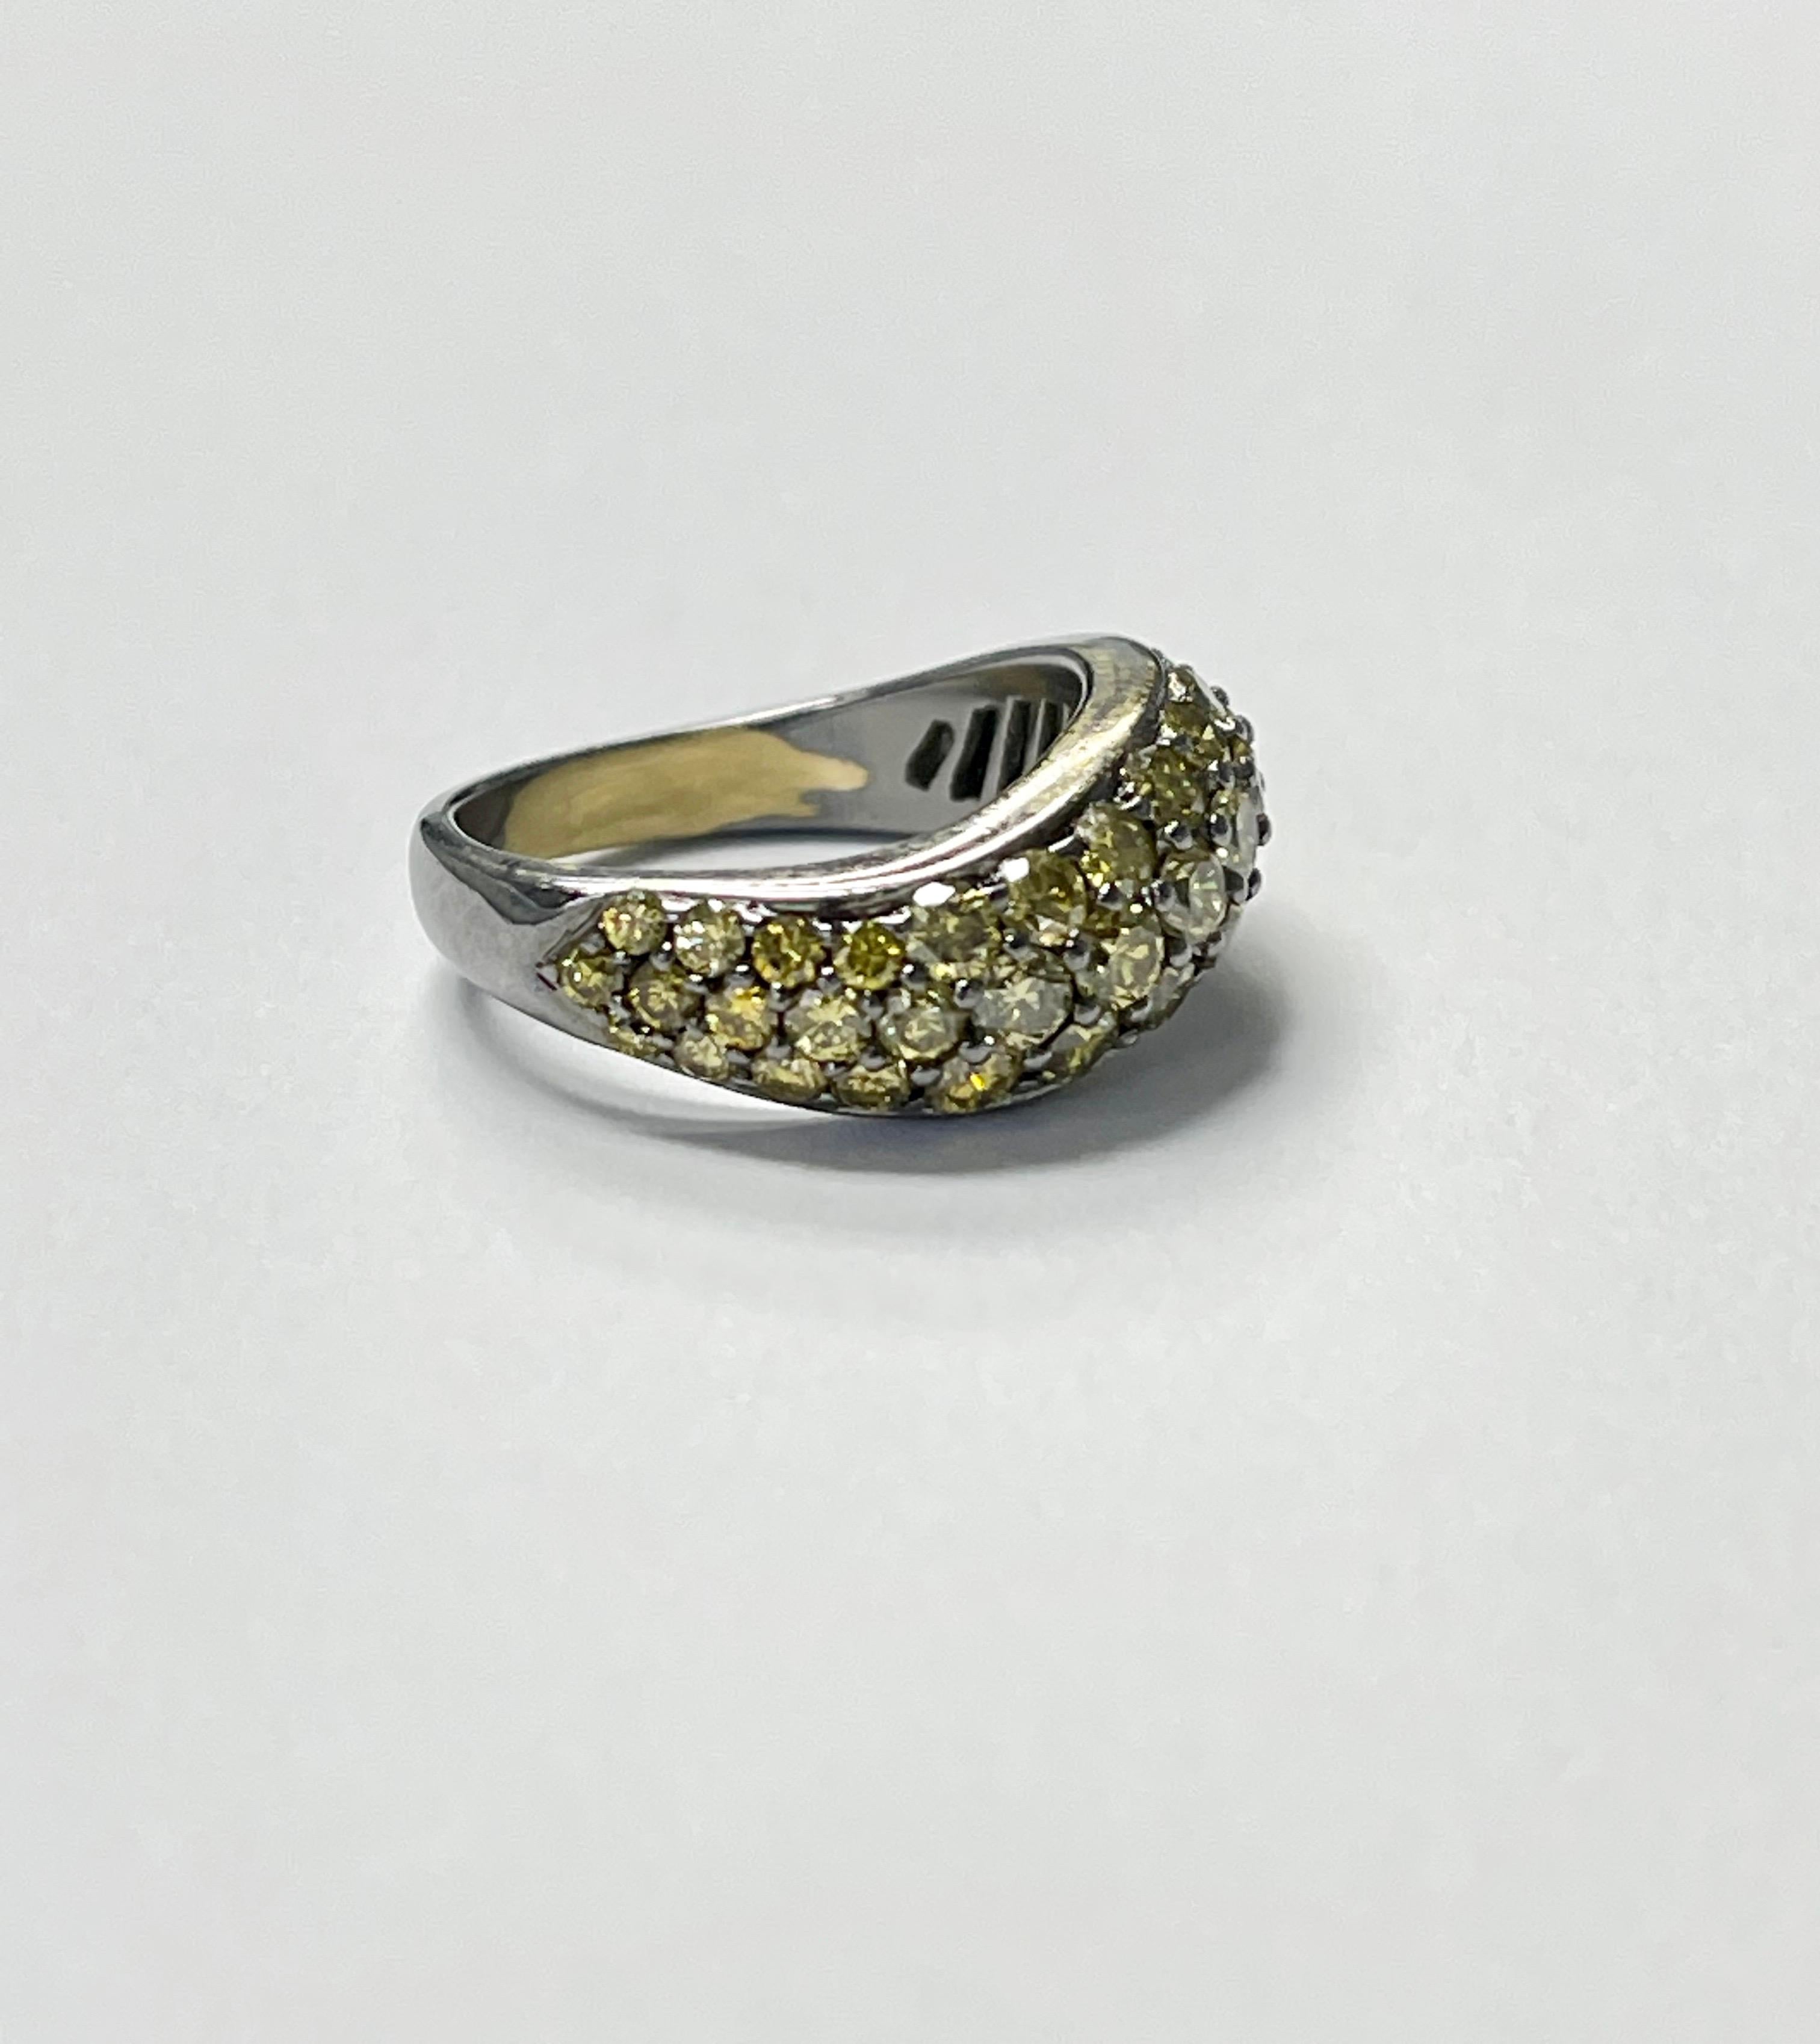 2.40 carat Yellow diamond band ring handmade in 18K blackened or oxidized gold. 
The details are as follows :
Yellow diamond weight : 2.40 carat 
Metal : 18k blackened gold
Ring size : 6 1/2 